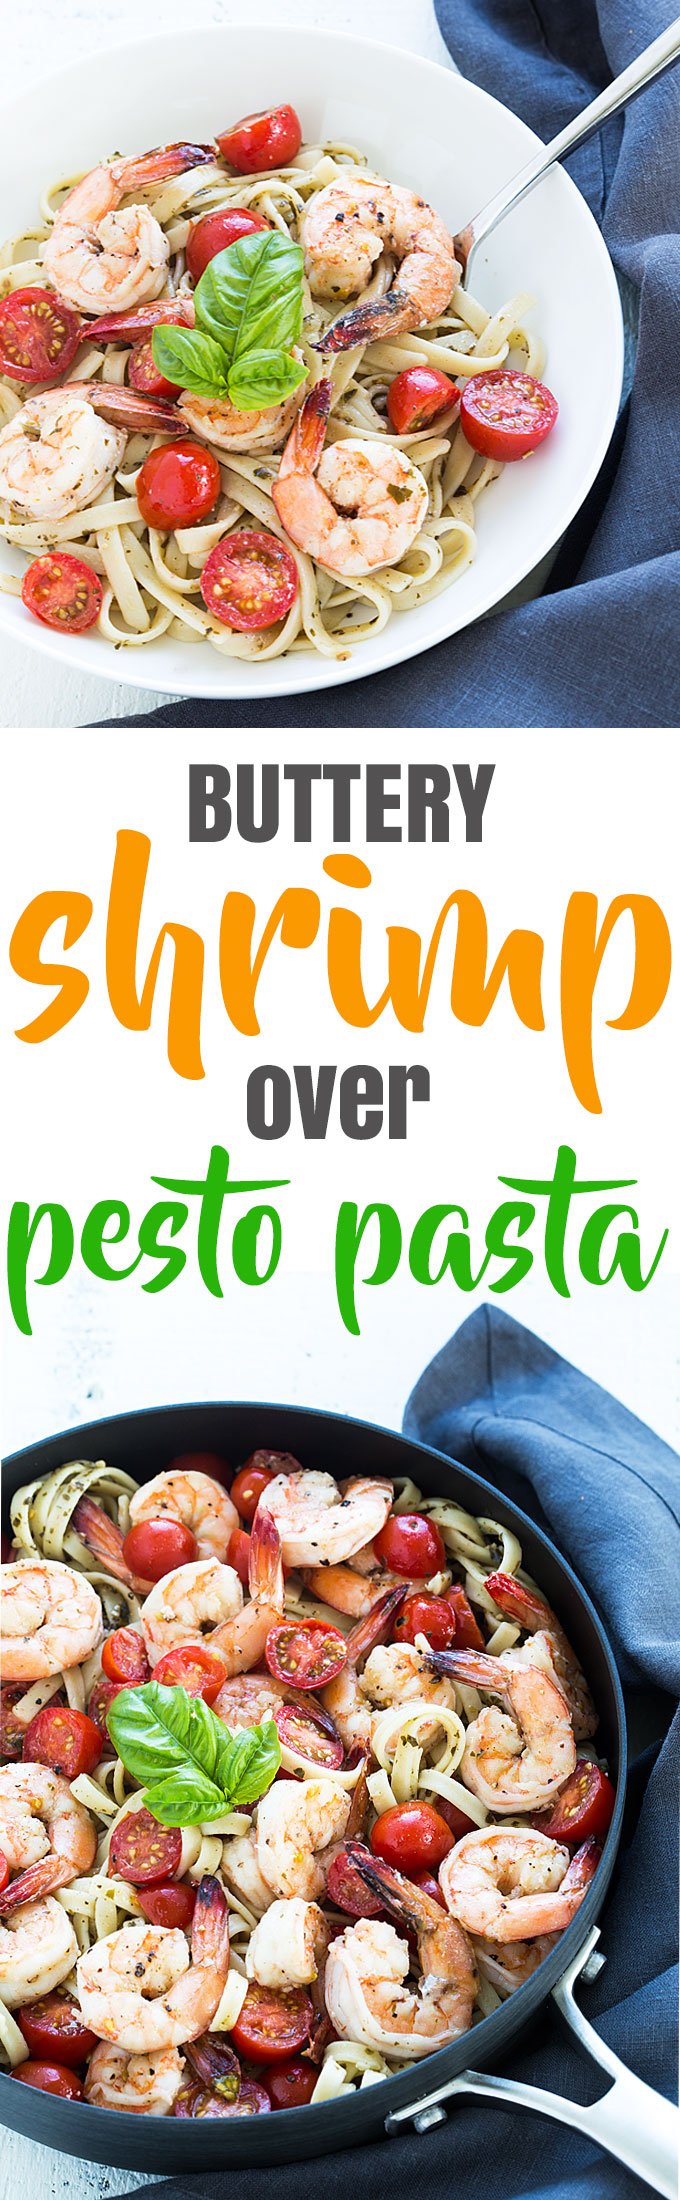 A two image vertical collage of buttery shrimp over pesto pasta with overlay text.